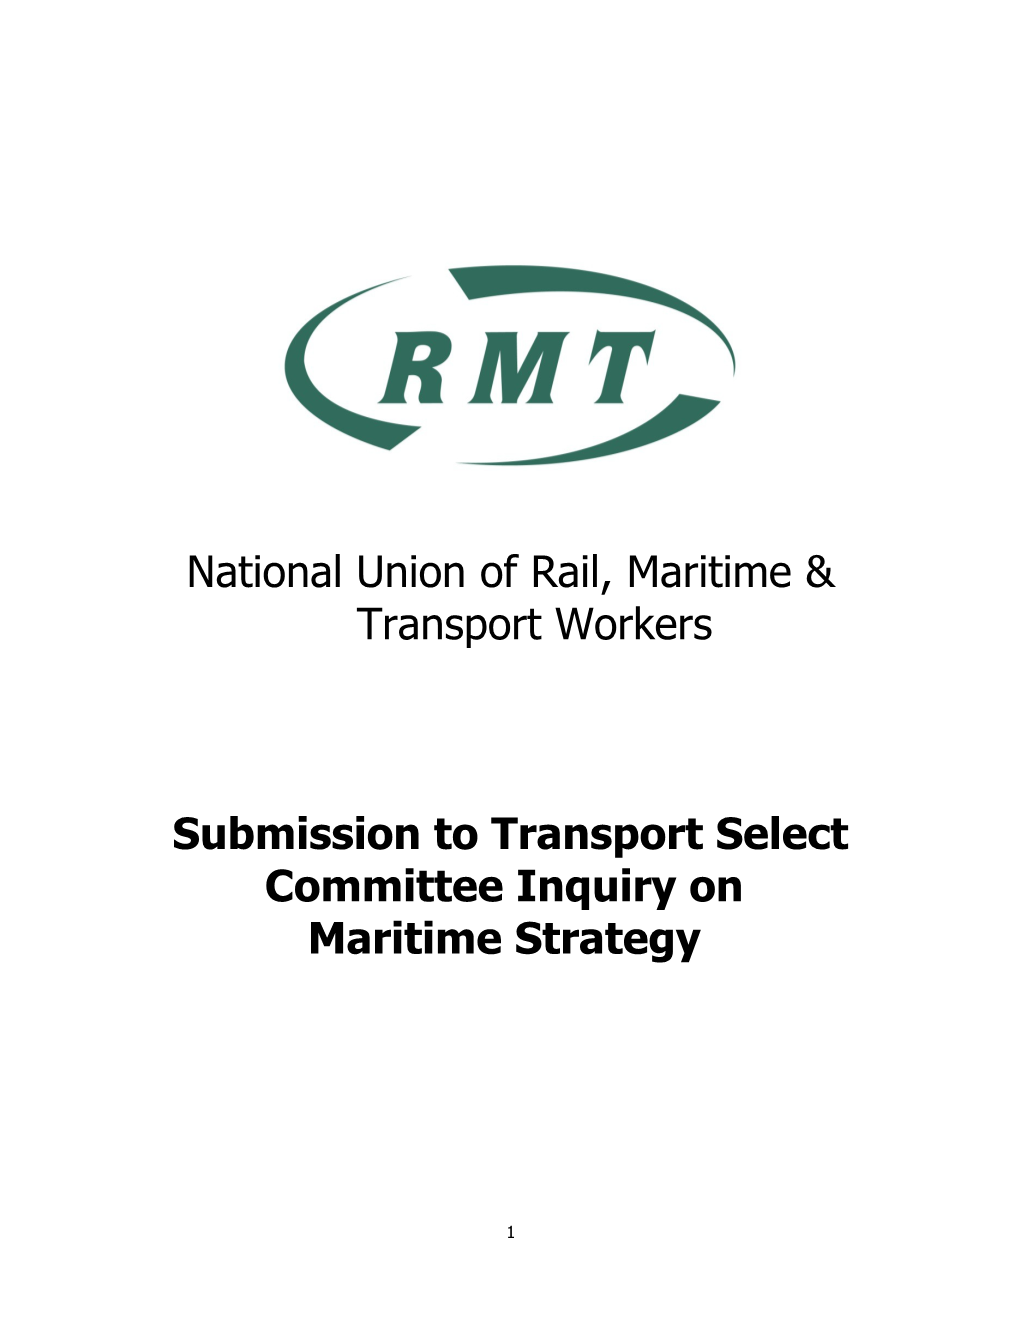 Submission to Transport Select Committee Inquiry On